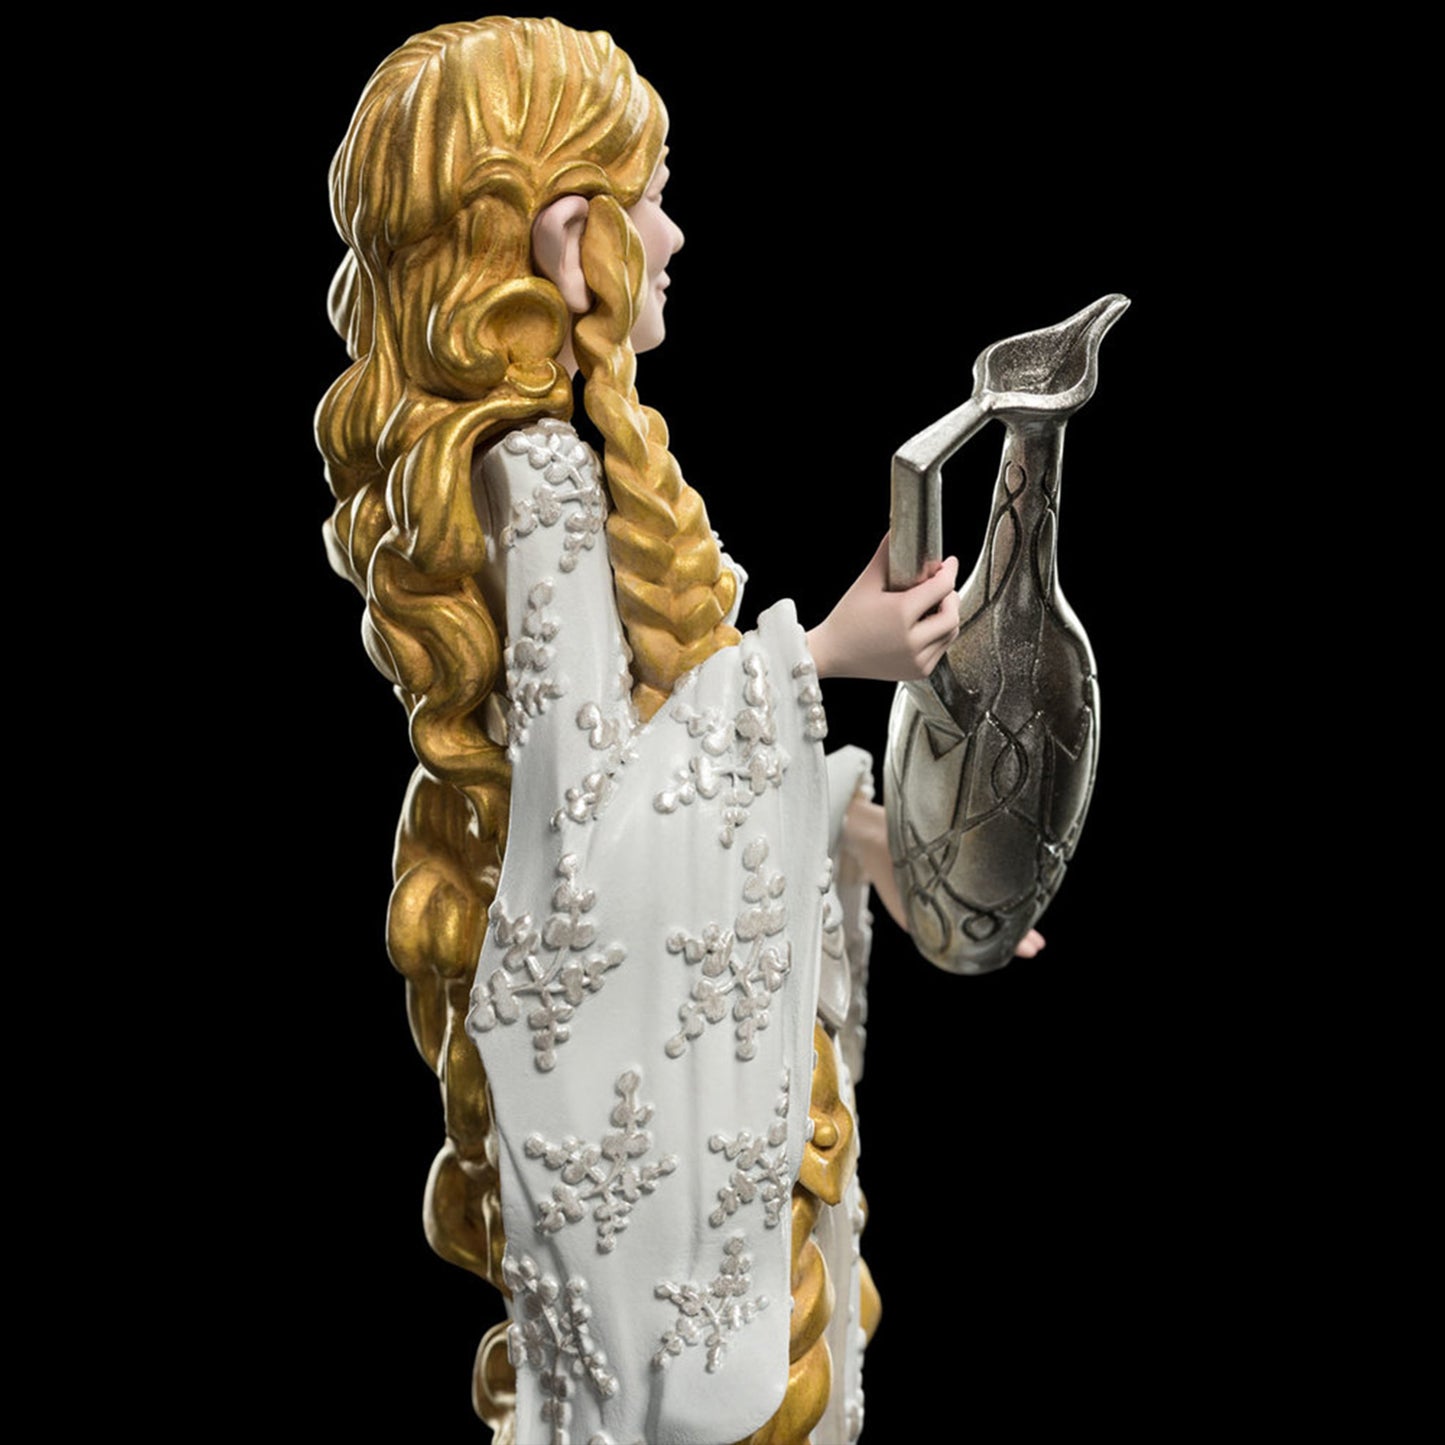 Galadriel Lord of the Rings Mini Epics Statue by Weta Workshop